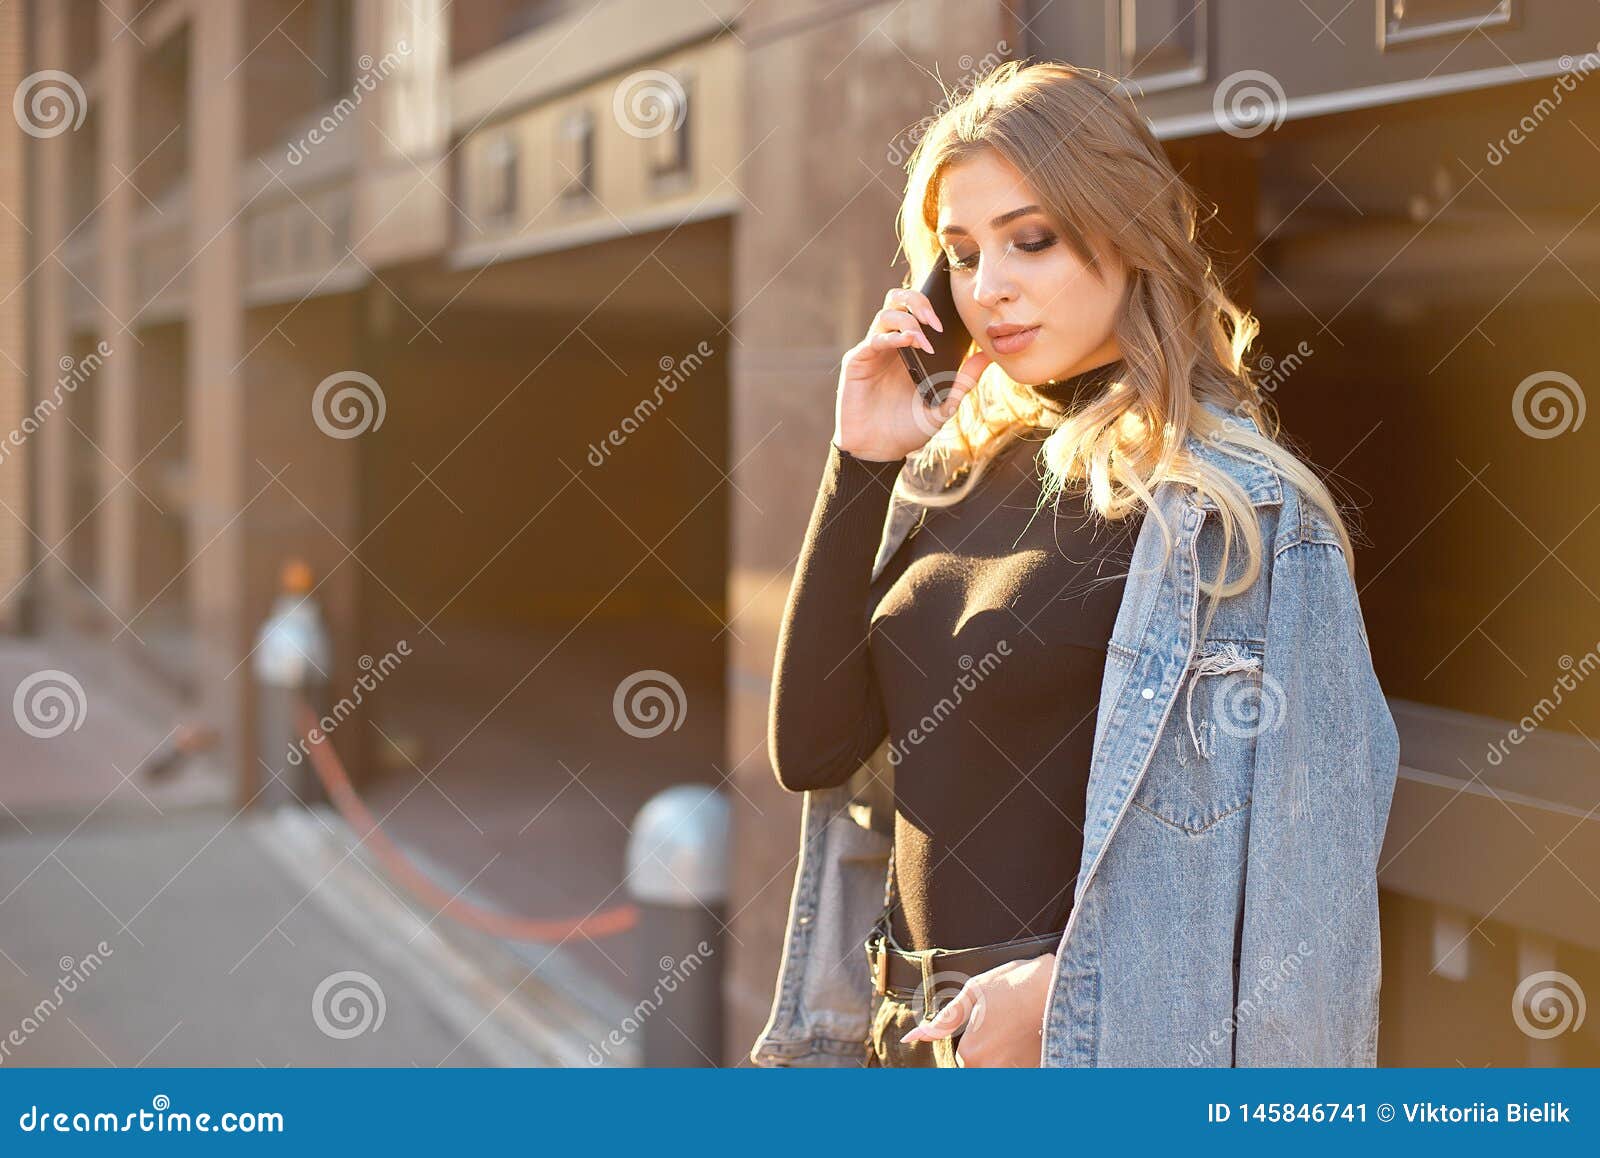 Emotional Stylish Portrait Of A Young Blond Woman On A Cityscape Background Close Up In The 